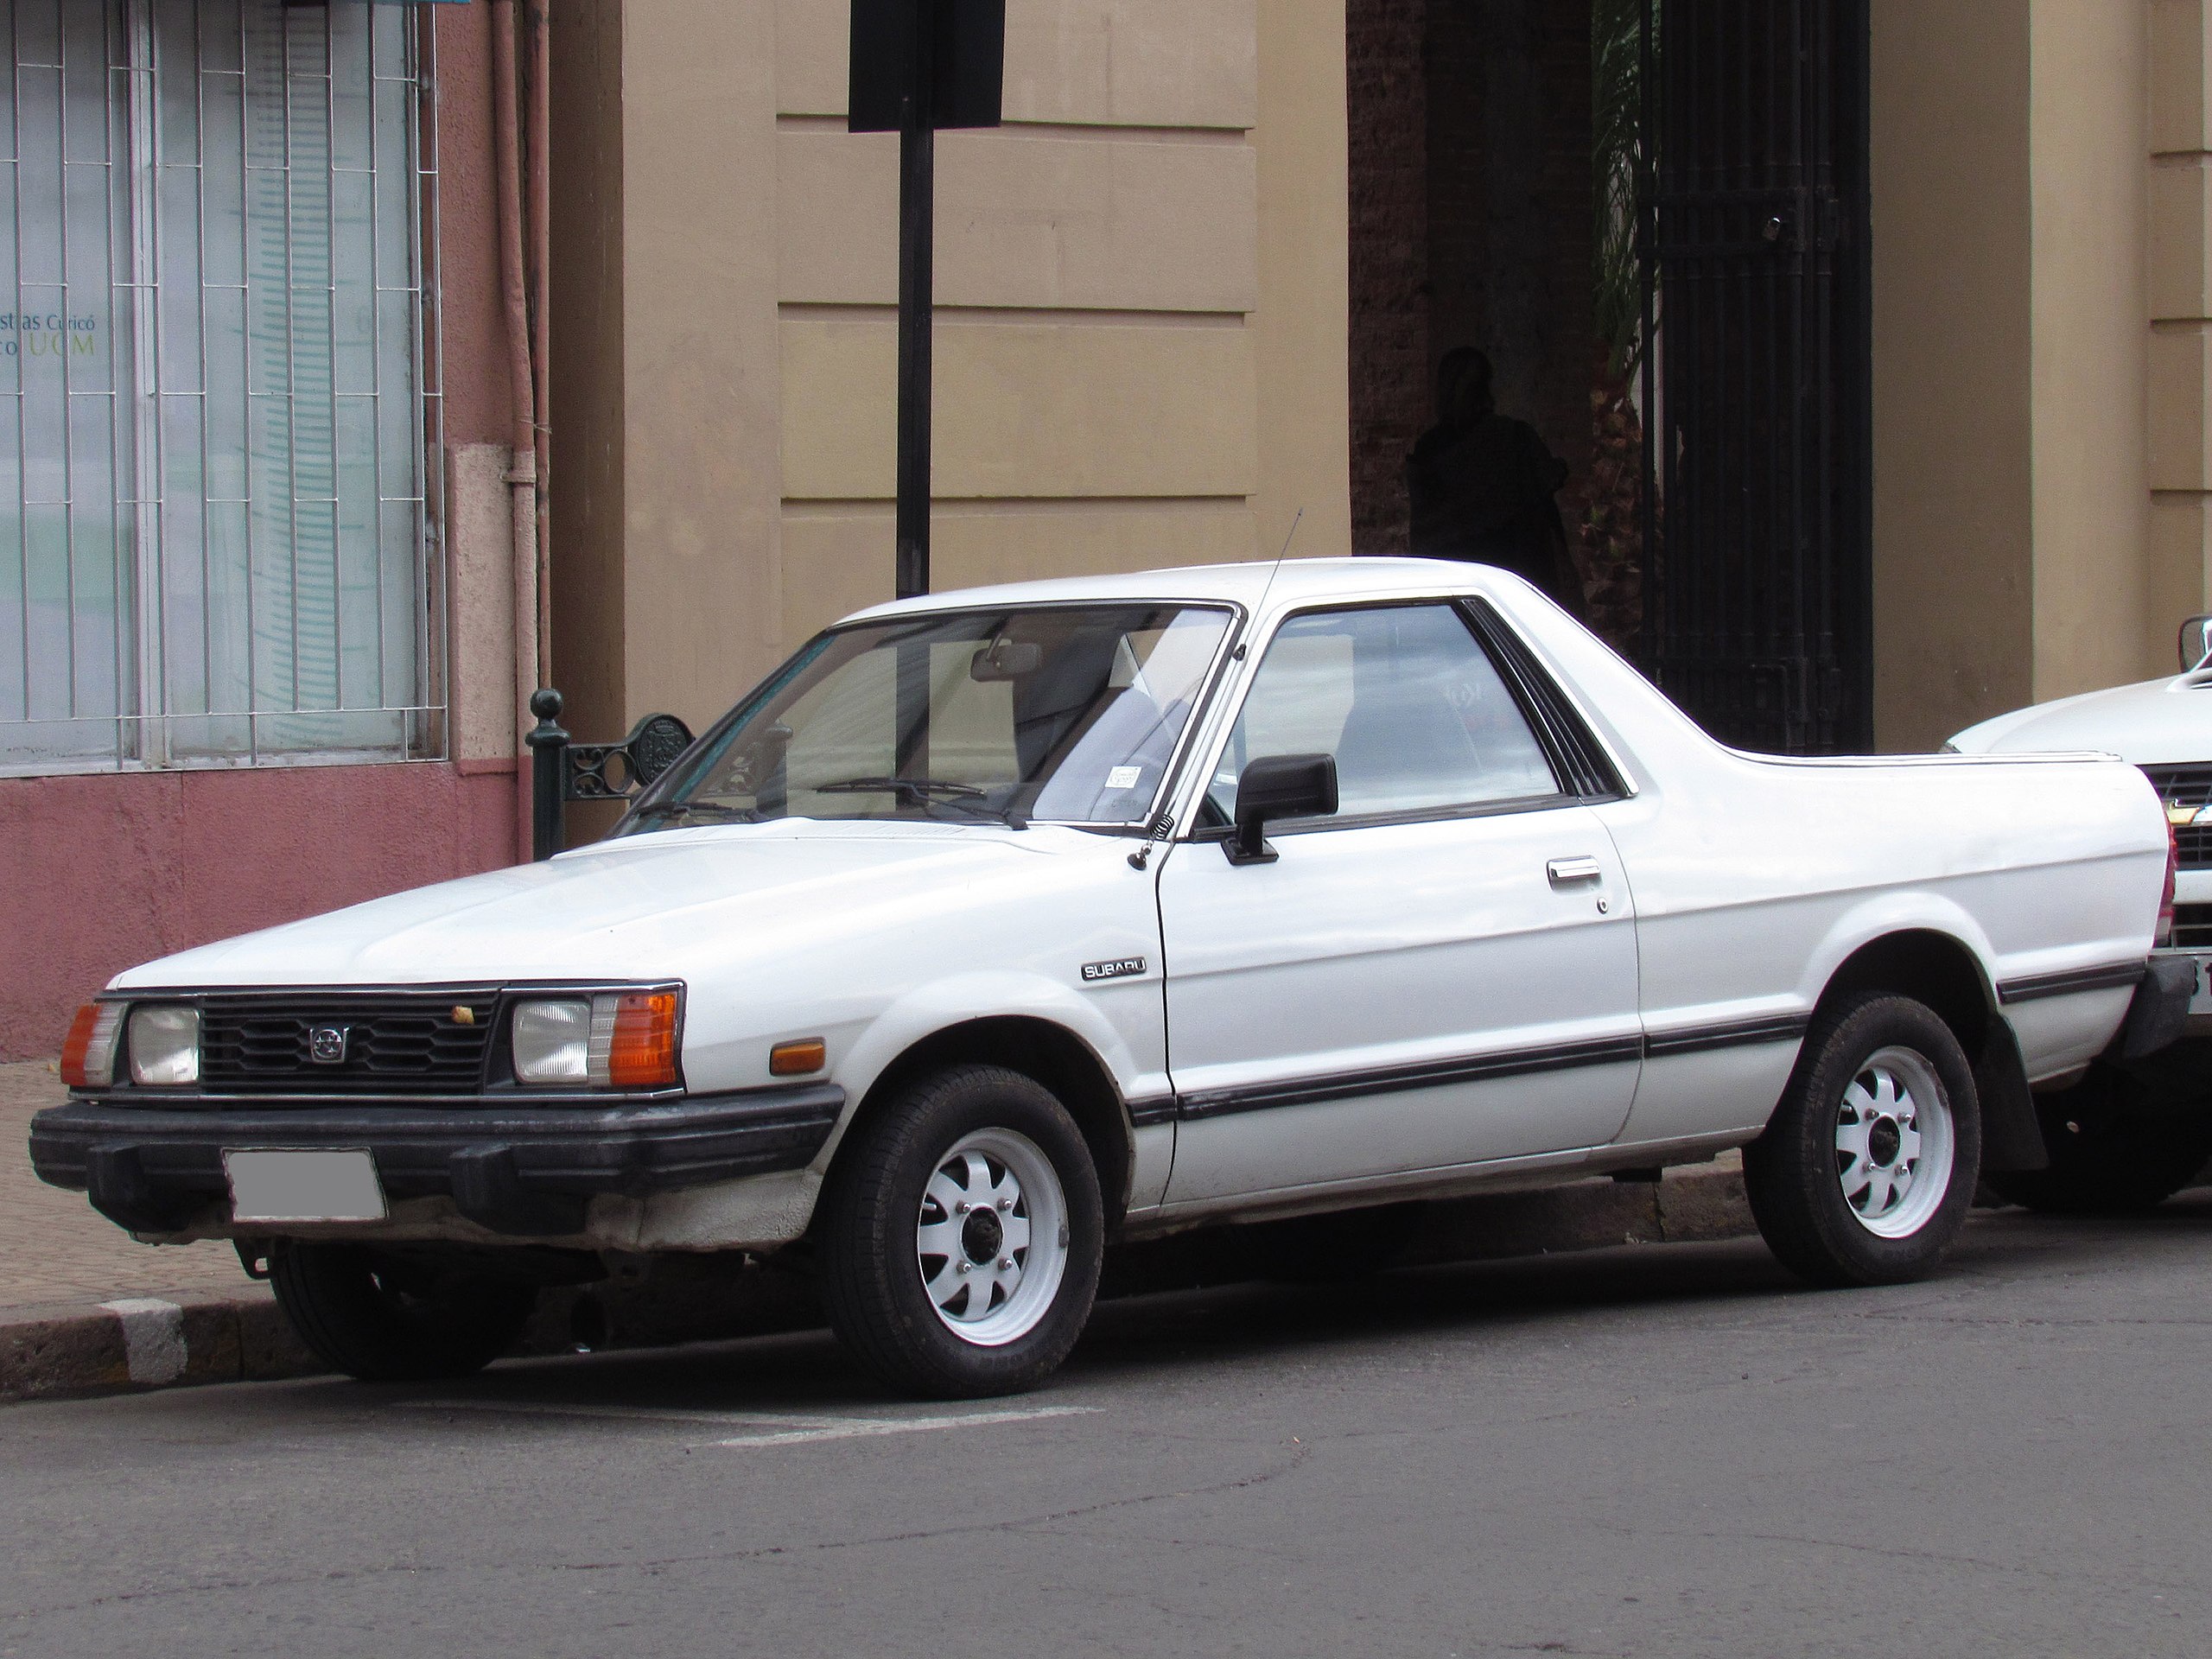 Ute asiática: Subaru Brumby
By order_242 from Chile - Subaru 1800 MV 4WD 1992, CC BY-SA 2.0, https://commons.wikimedia.org/w/index.php?curid=34575463